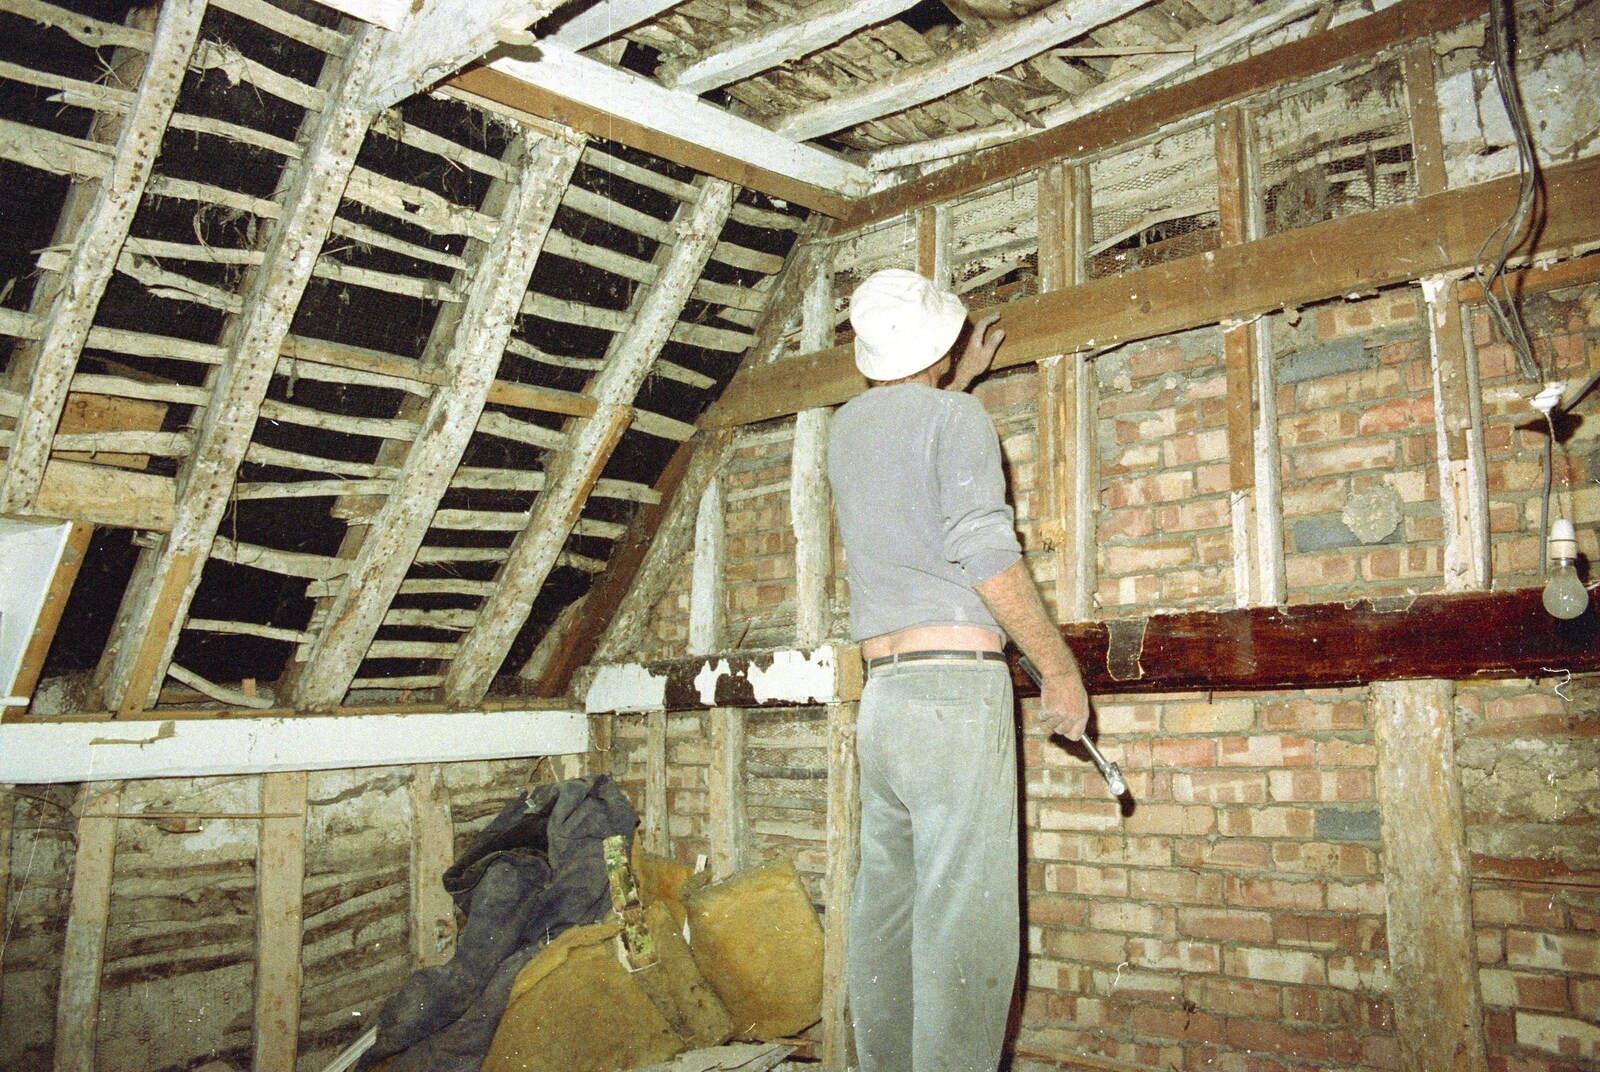 The Old Man pulls some nails out from Hale-Bopp and Bedroom Demolition, Brome, Suffolk - 10th May 1997